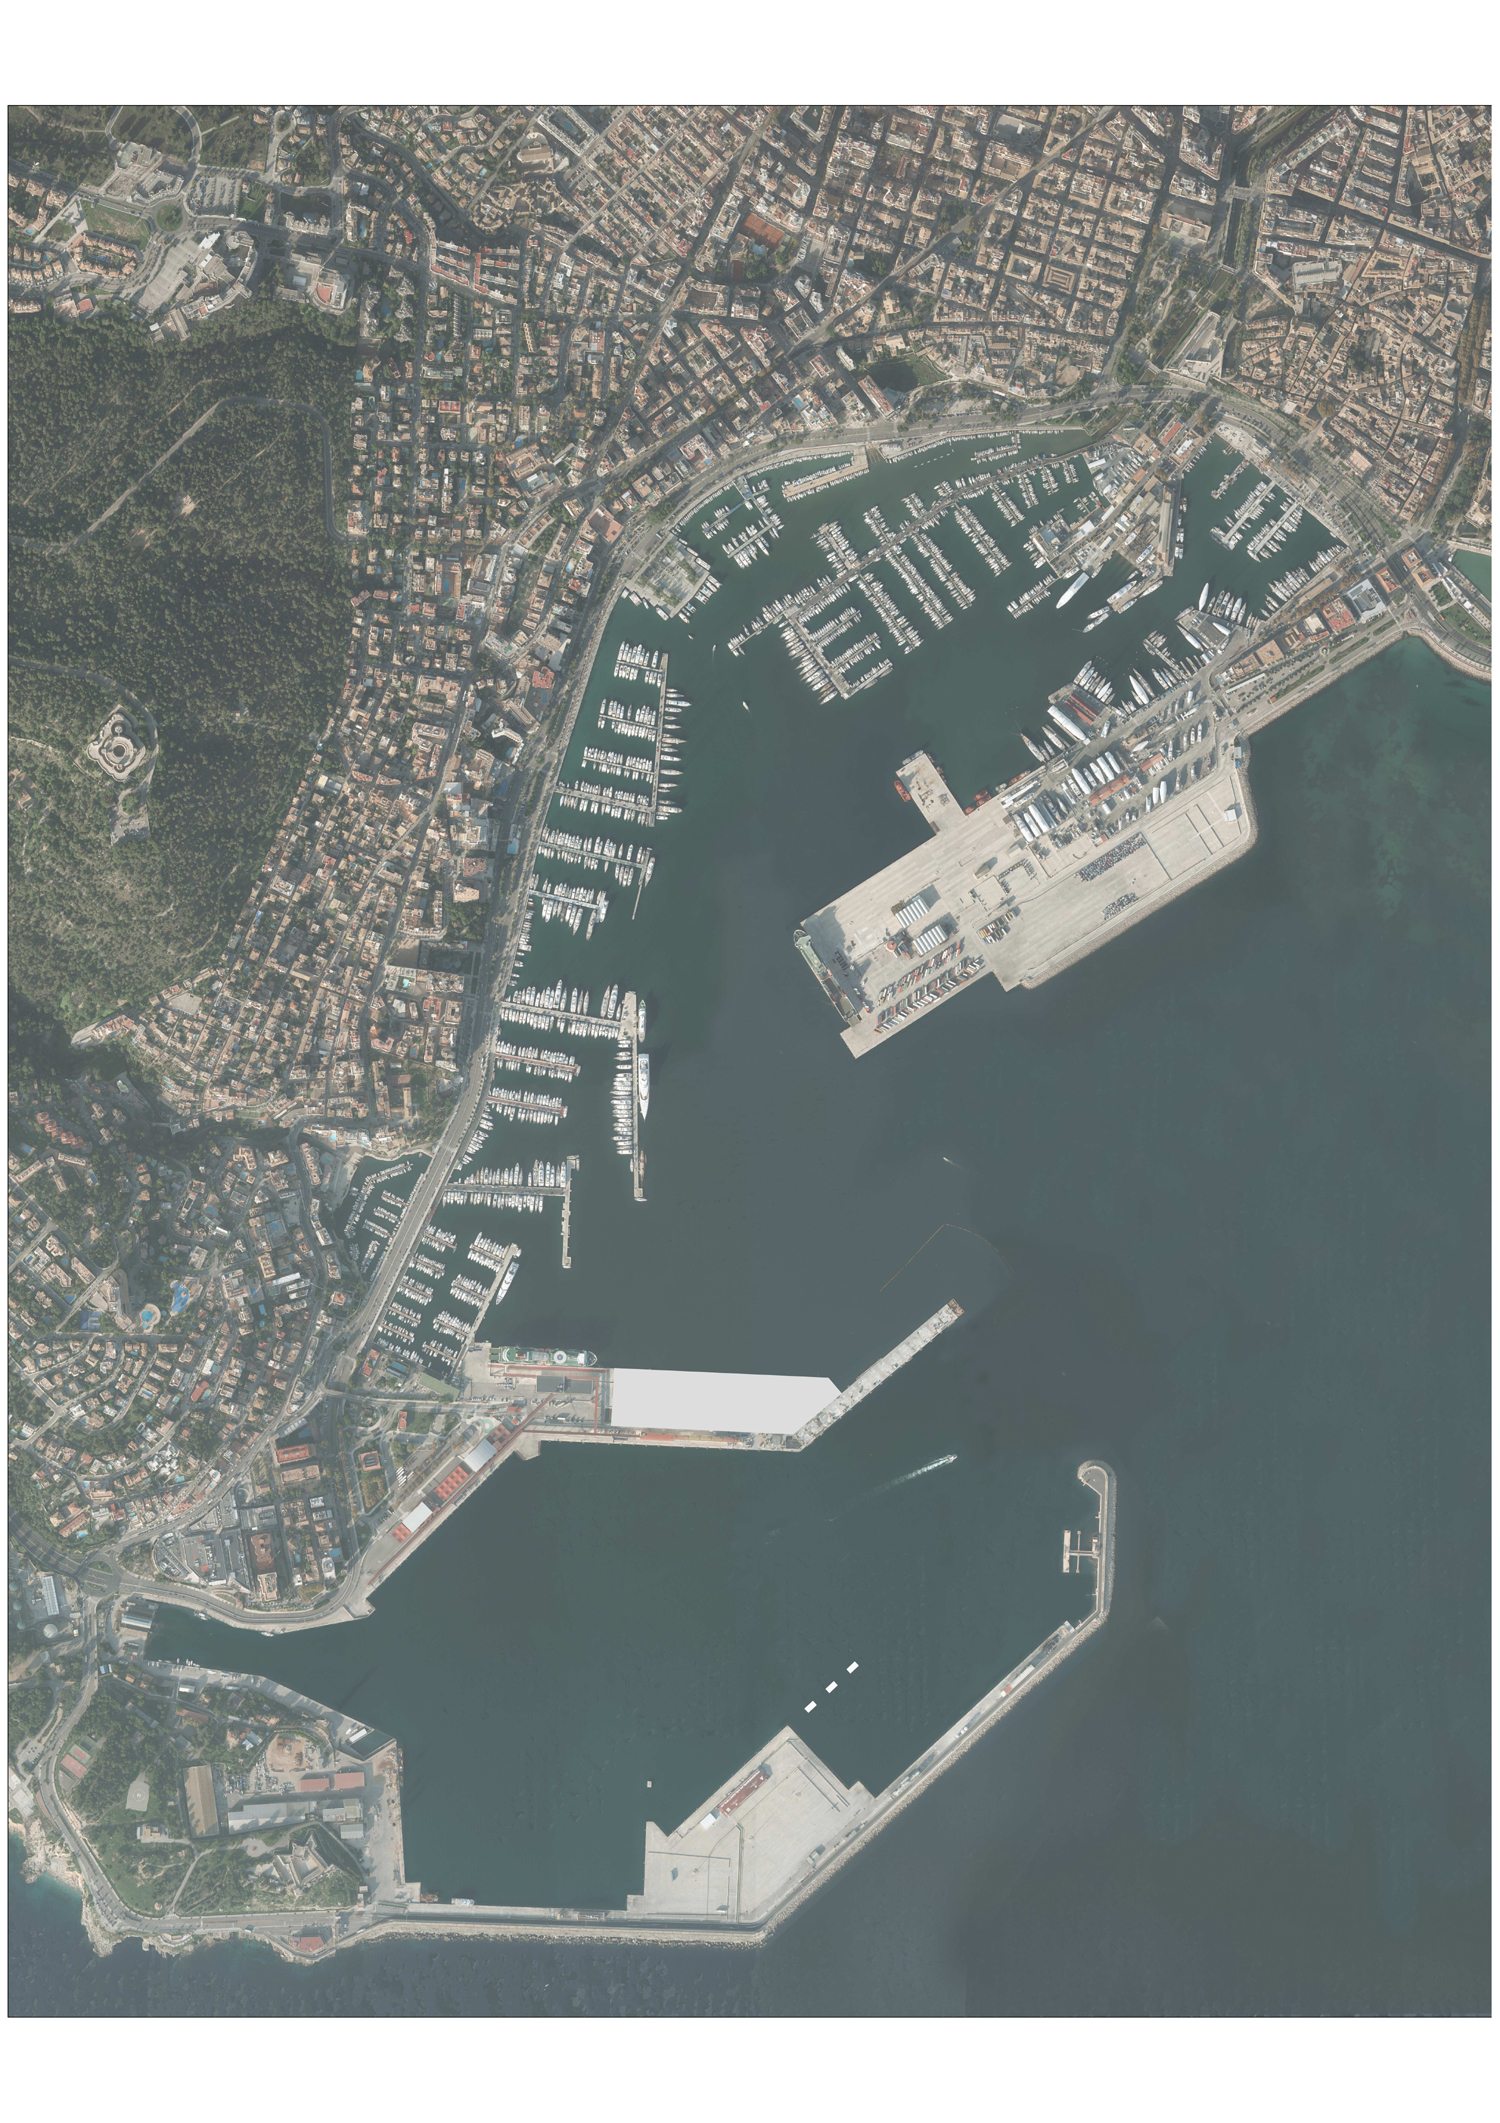 Public tender for the expansion of Poniente Norte Dock in Palma's Port 